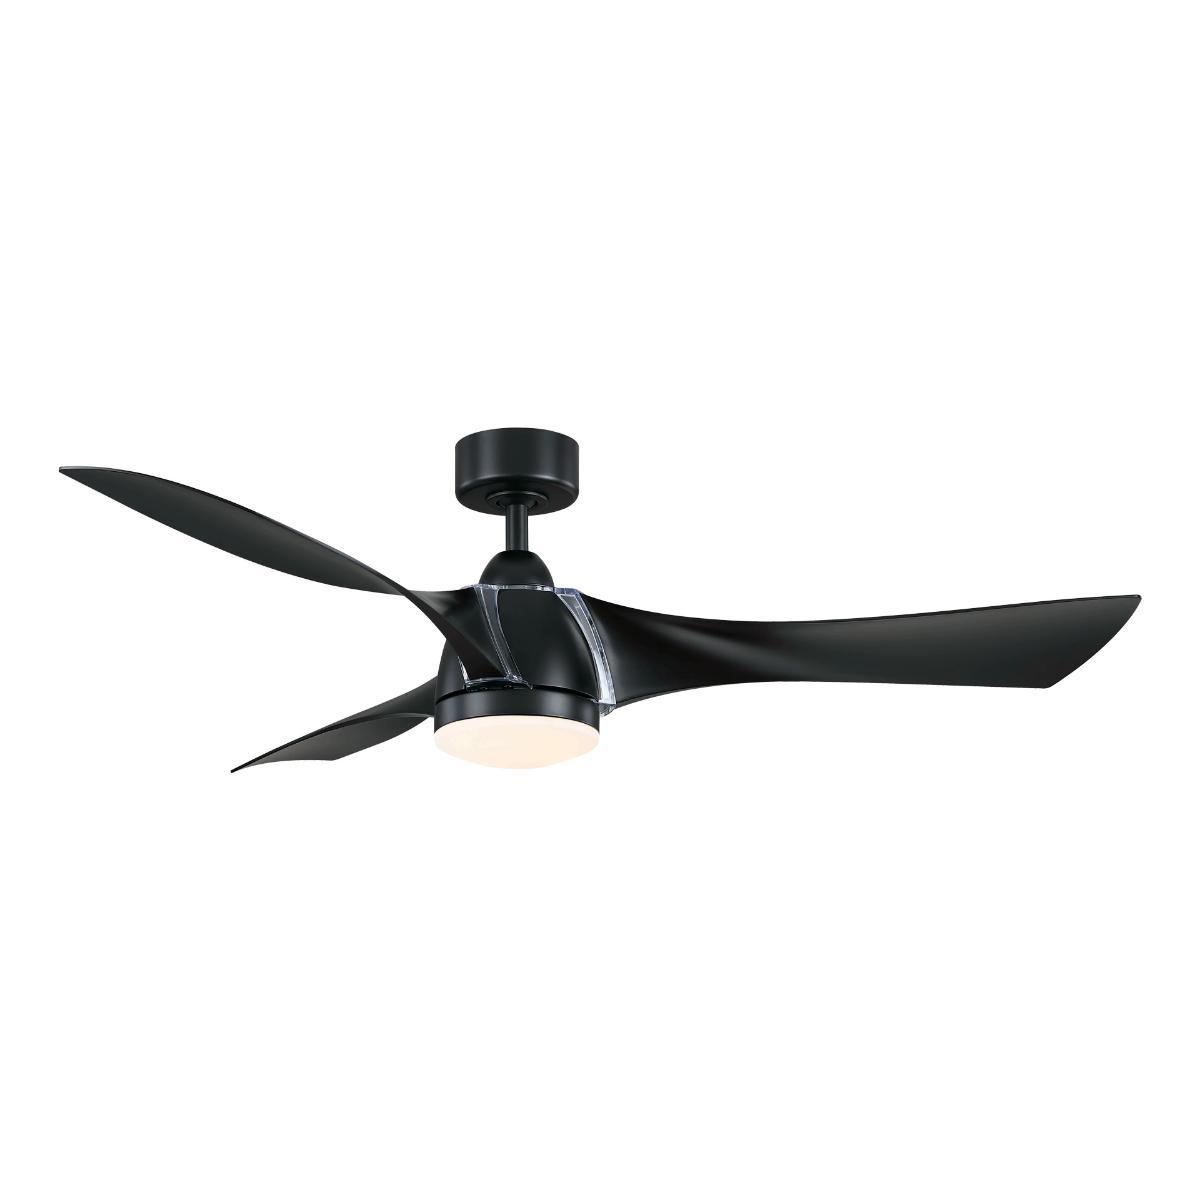 Klear 56 inch Indoor/Outdoor Ceiling Fan with LED CCT Select Light Kit and Remote, Black Finish - Bees Lighting